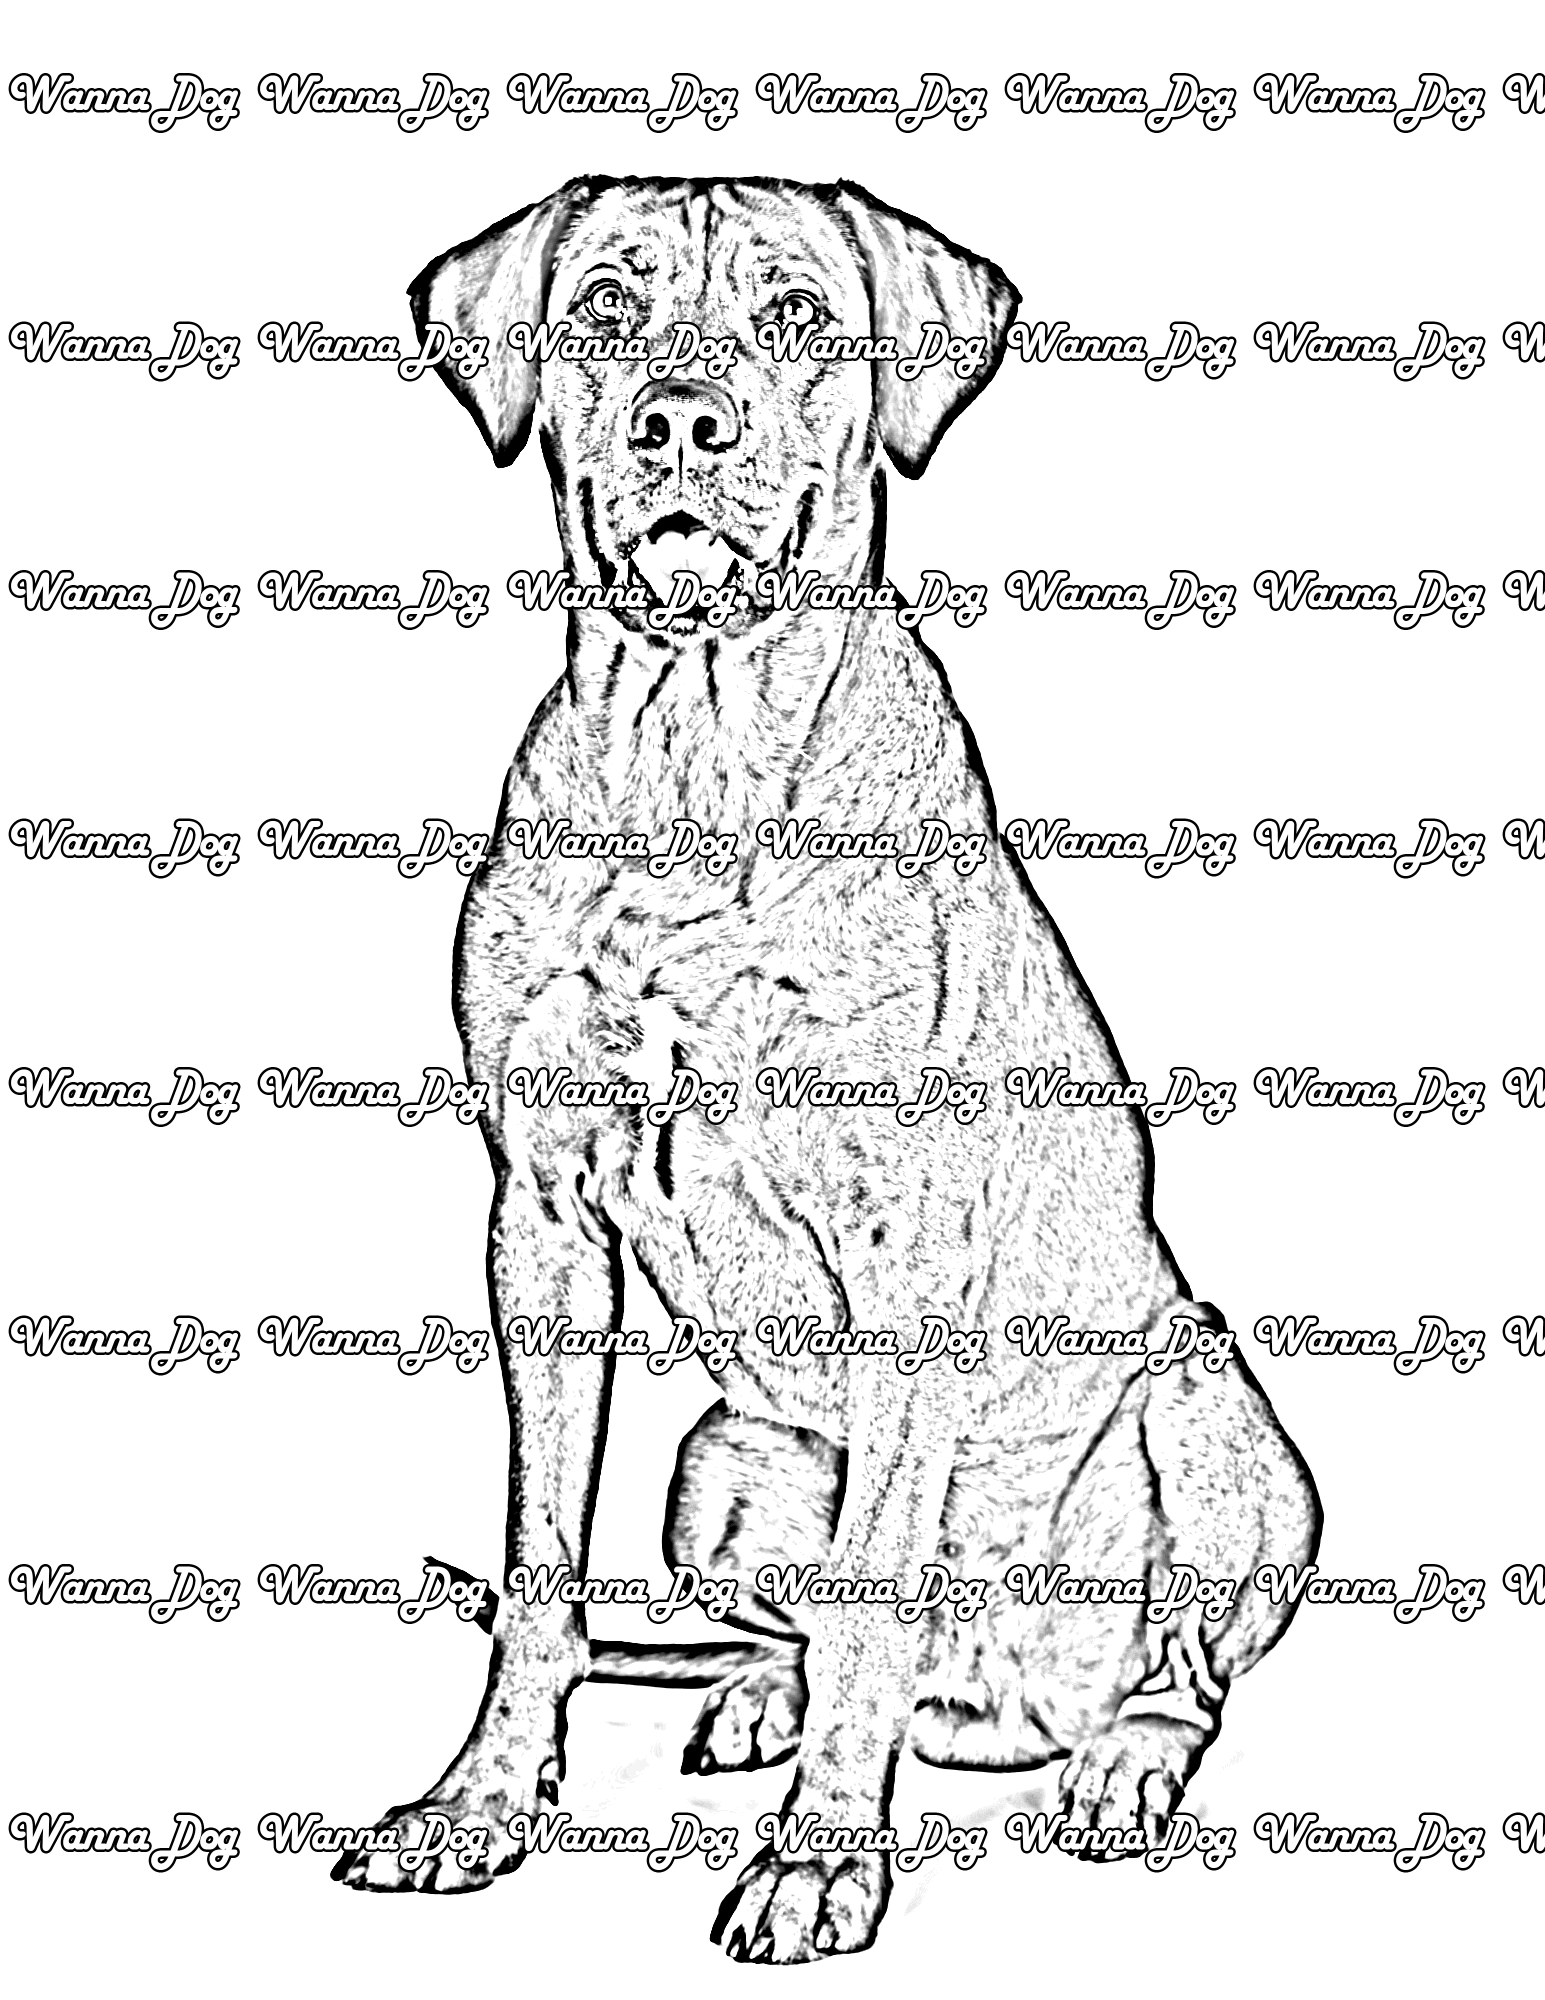 Rhodesian Ridgeback Coloring Page of a Rhodesian Ridgeback sitting with their tongue out